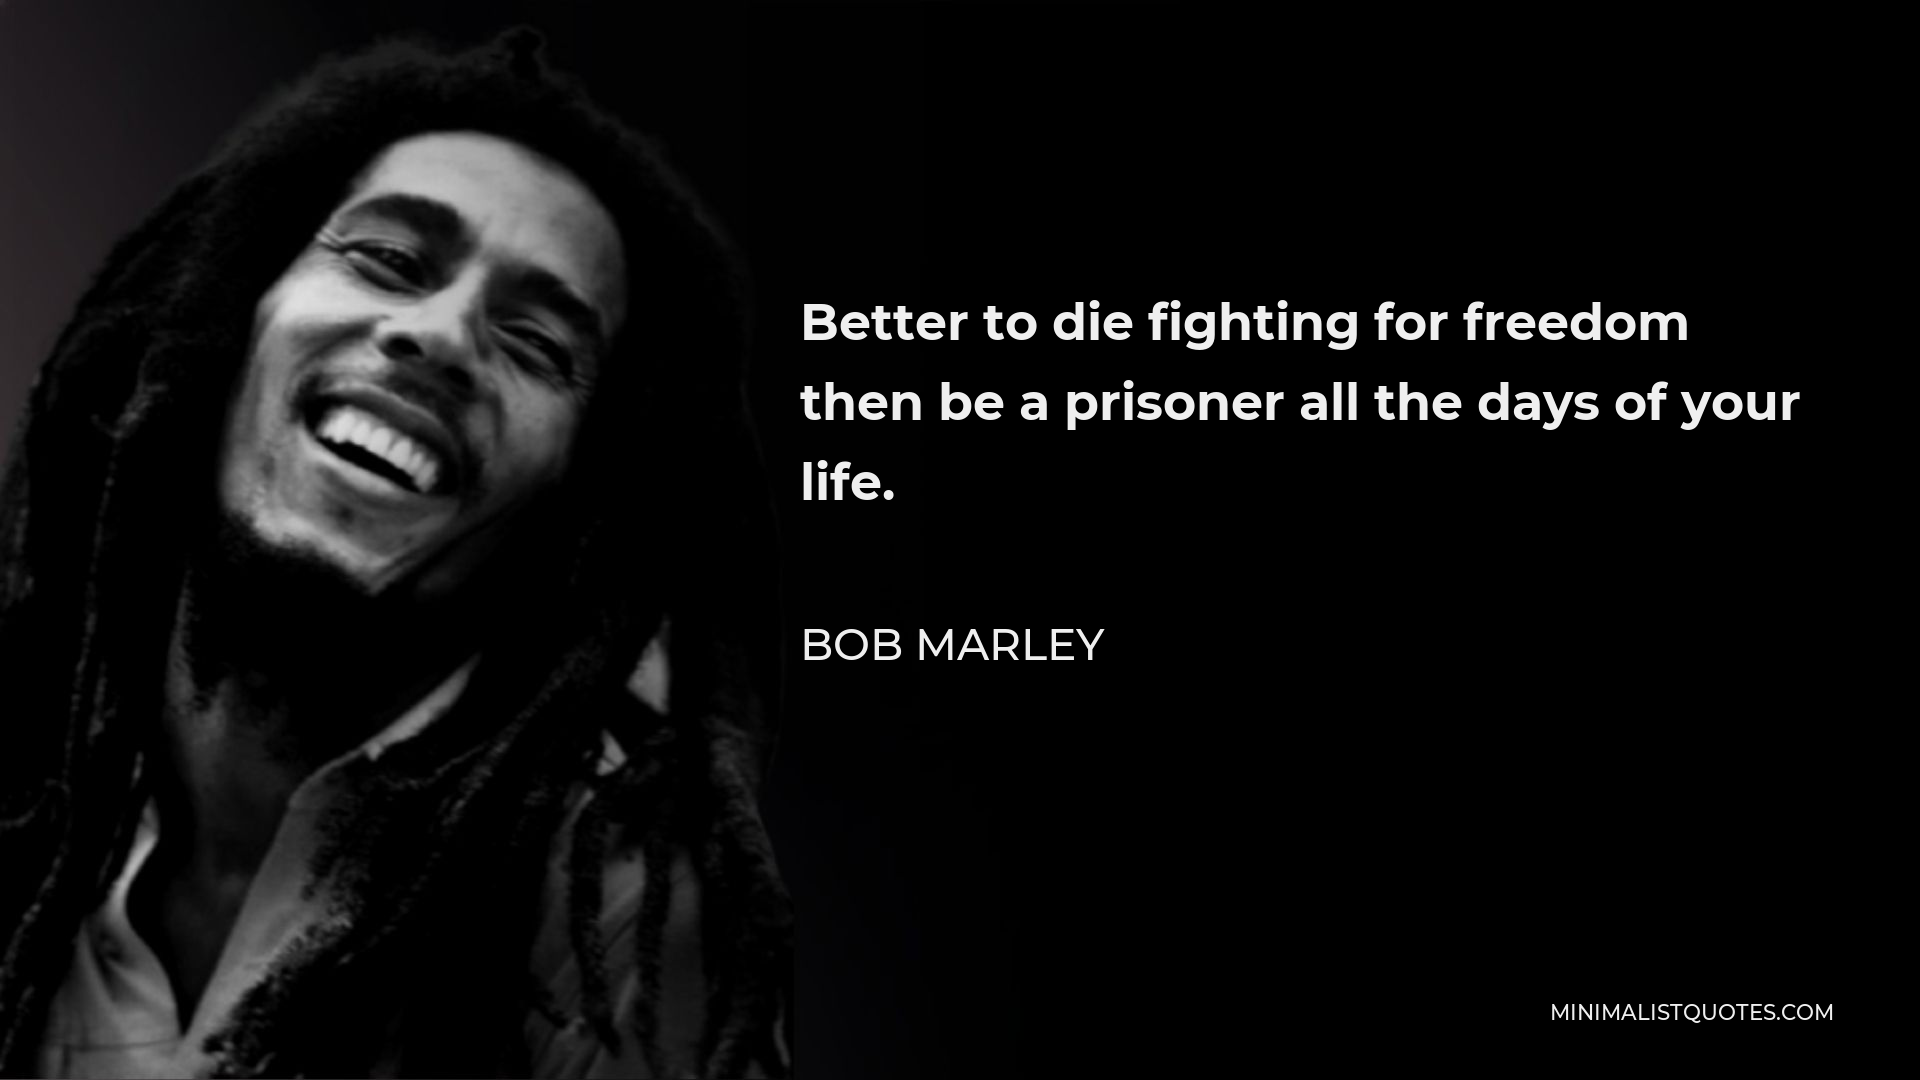 Bob Marley Quote - Better to die fighting for freedom then be a prisoner all the days of your life.